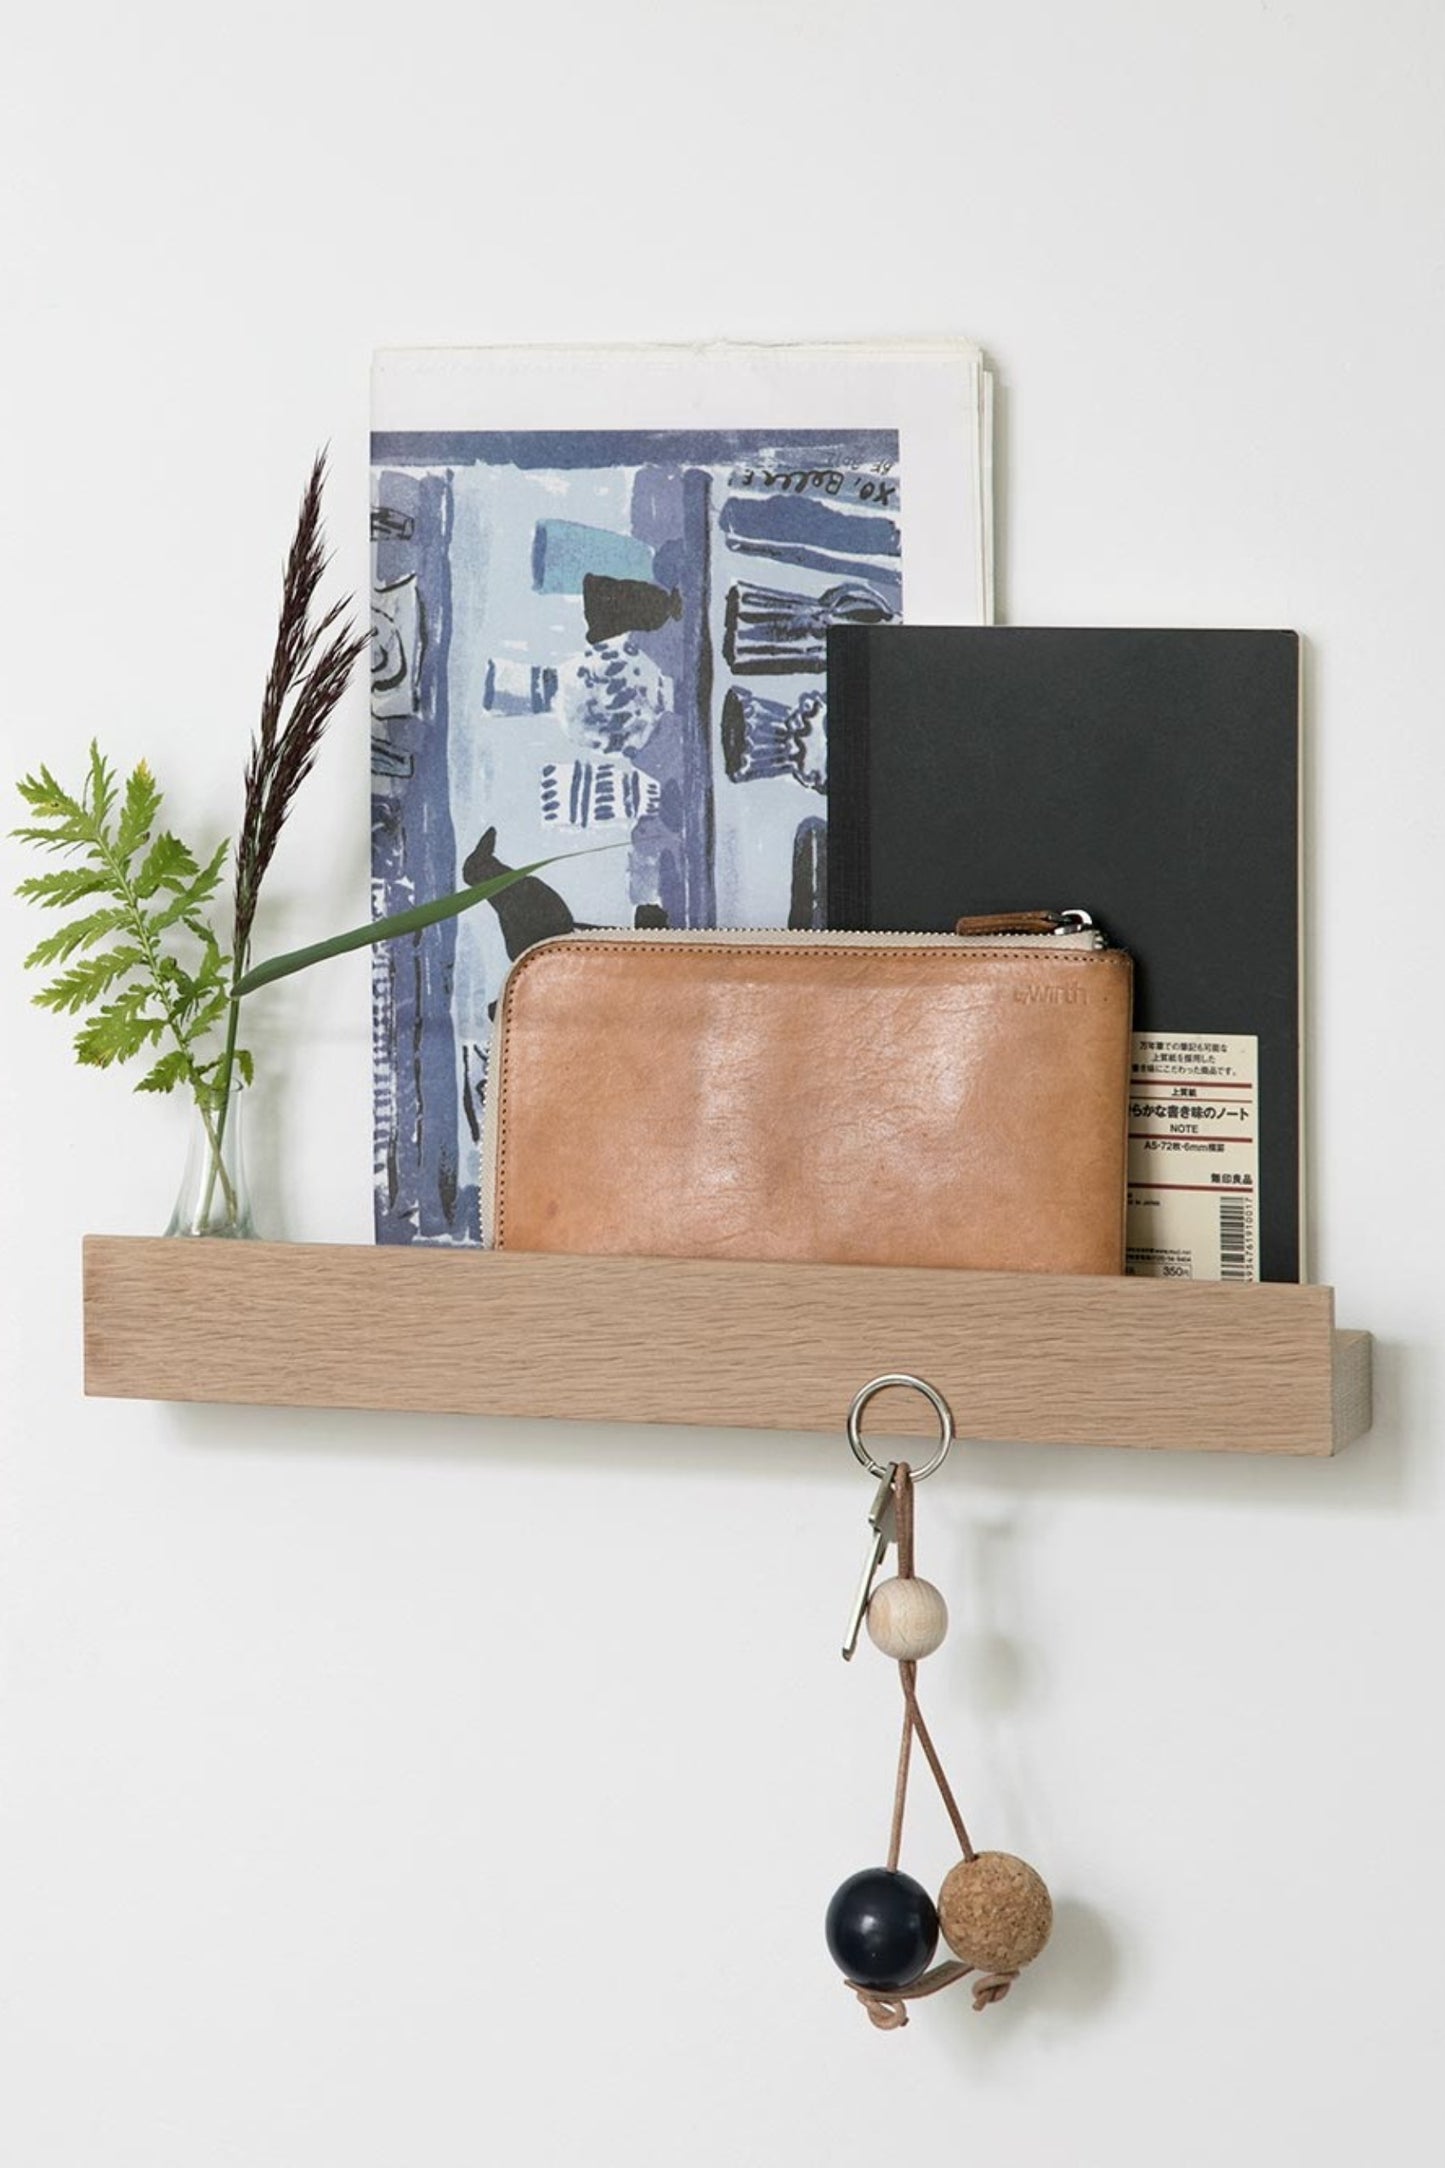 Magnet Shelf by EKTA Living - Wooden magnet shelf in use, holding notebook, wallet and keys. A modern and unique way to showcase your favourite items.